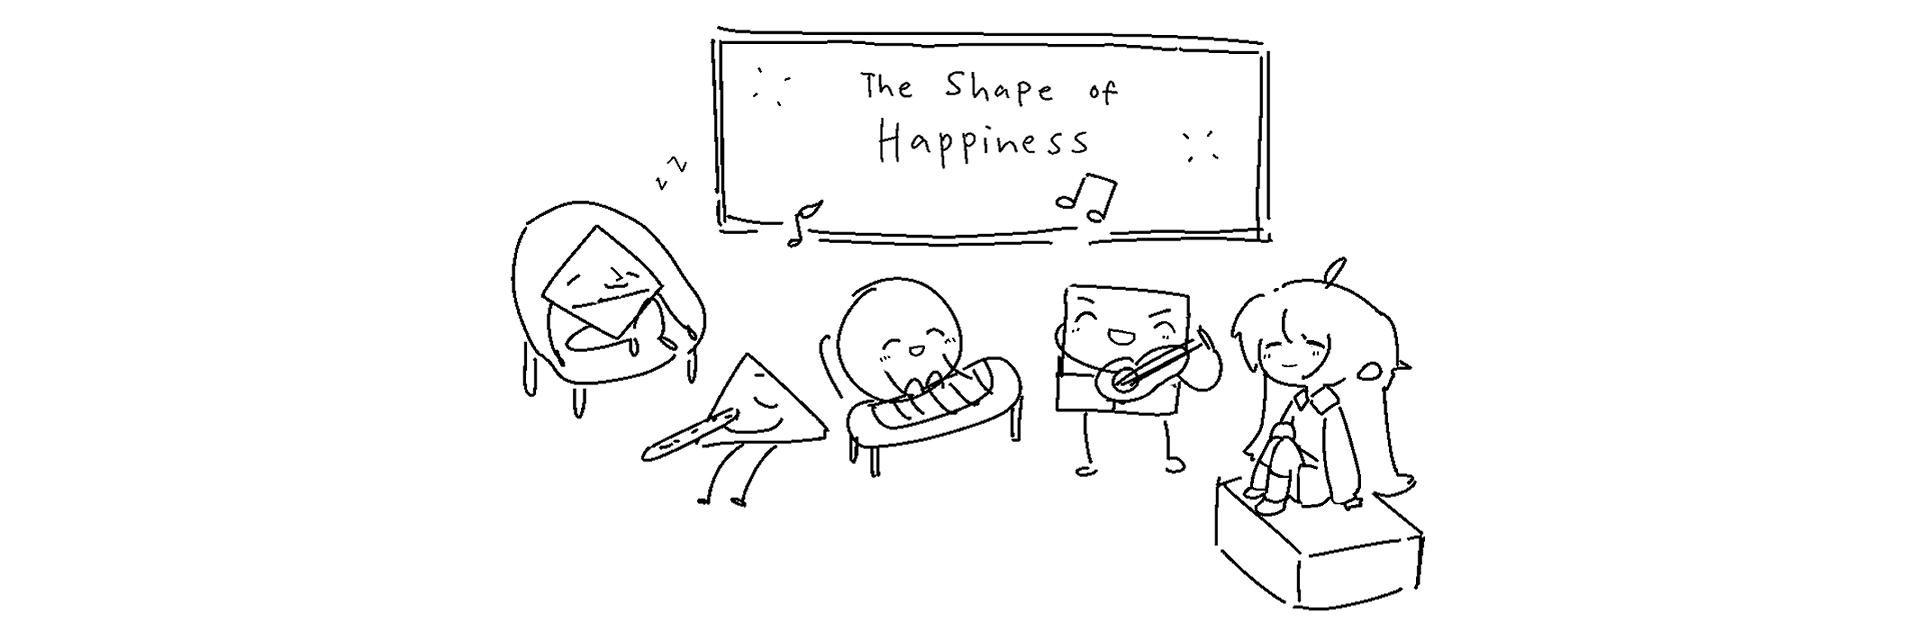 The Shape of Happiness